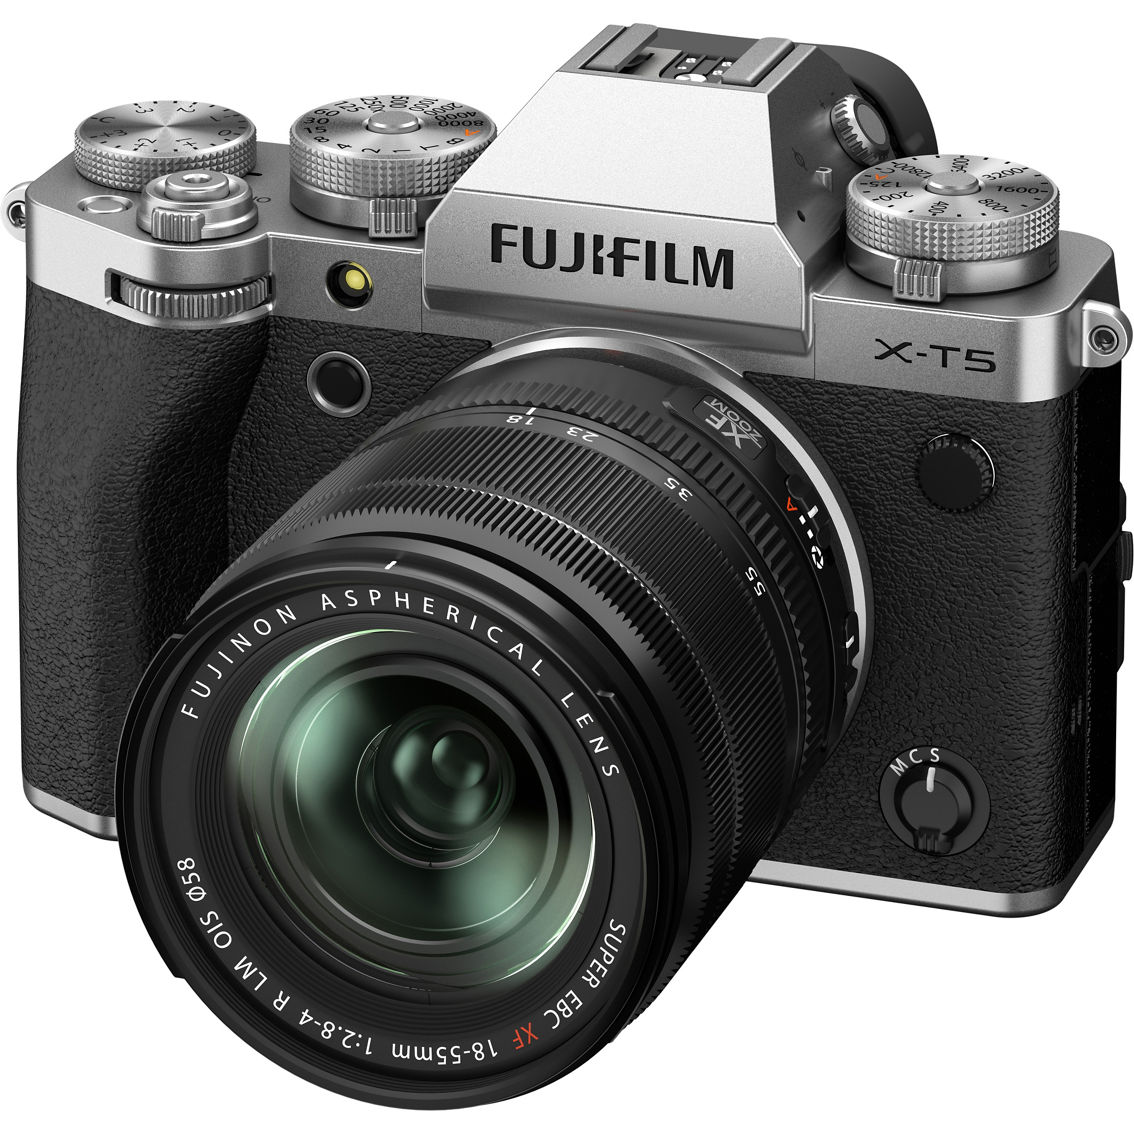 Fujifilm XT5 Mirrorless Camera Body and Silver XF 18 to 55mm F2.8-4 R LM OIS Lens - Image 5 of 7